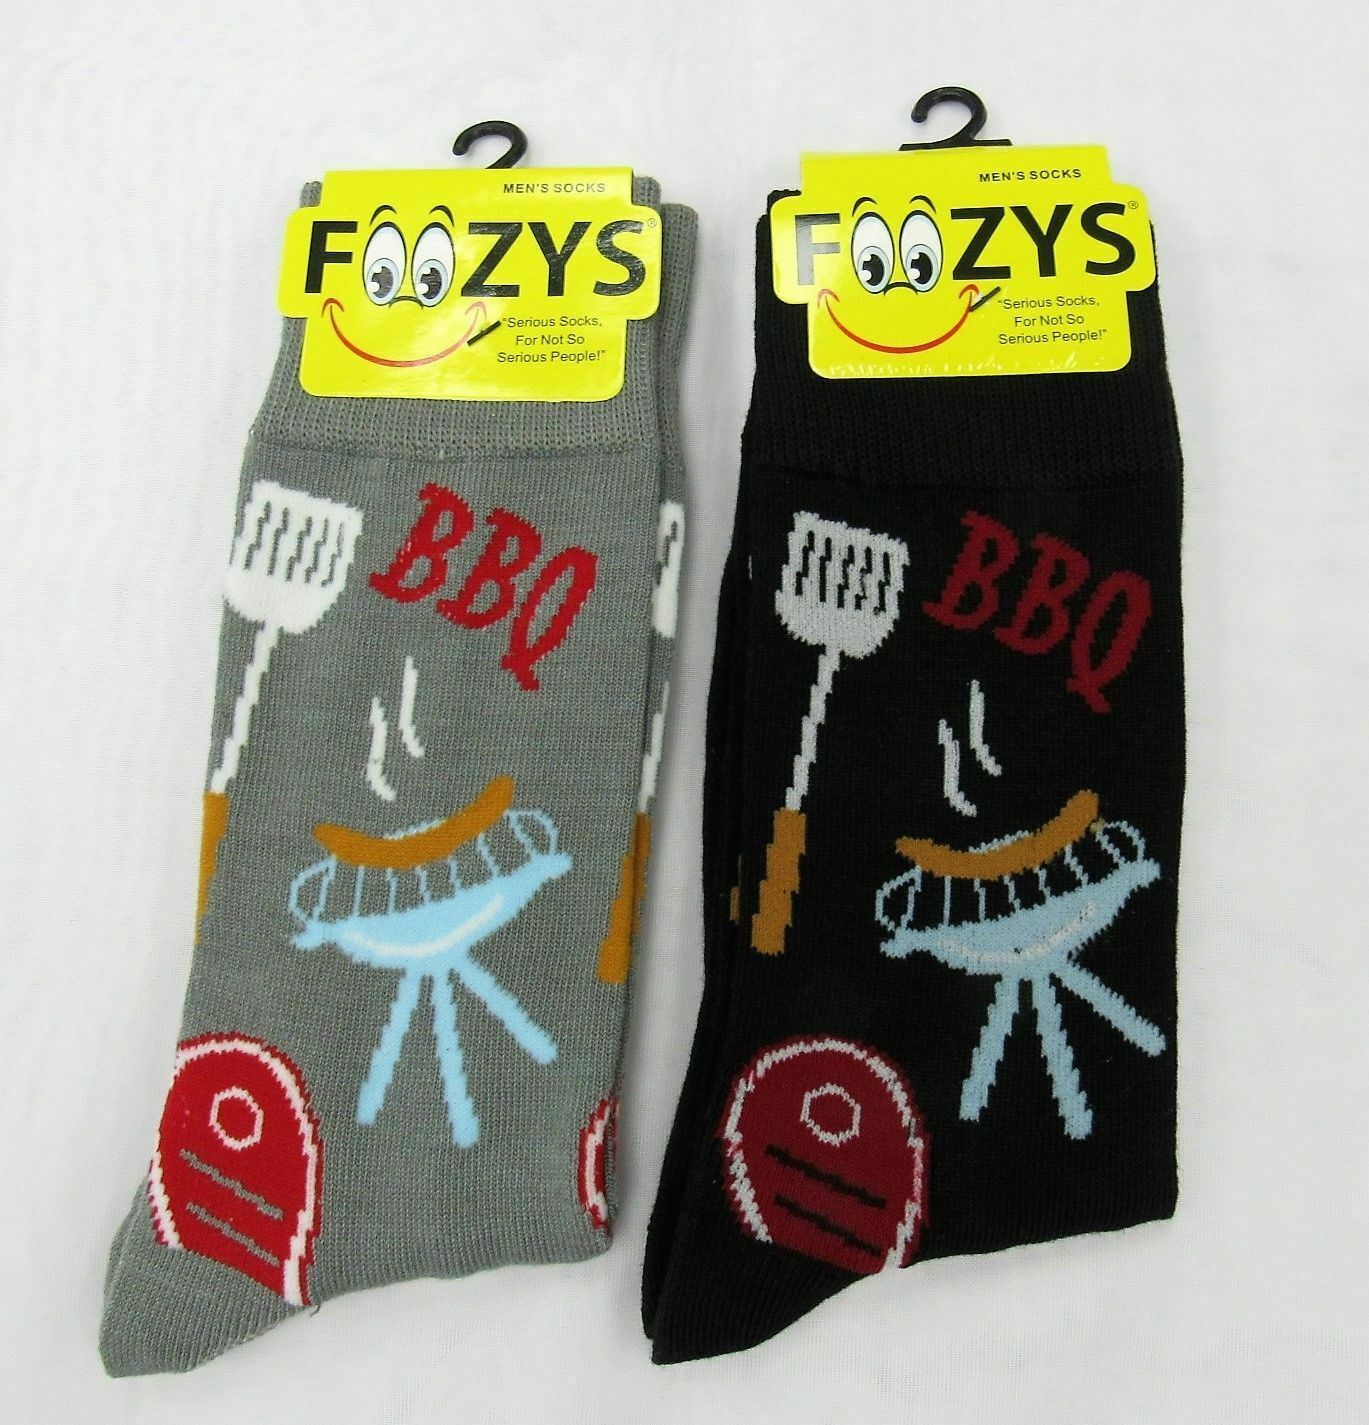 BBQ Grill Barbecue Raw Meat Steak Chef Cook Spatula 2 Pairs Foozy Socks Men's